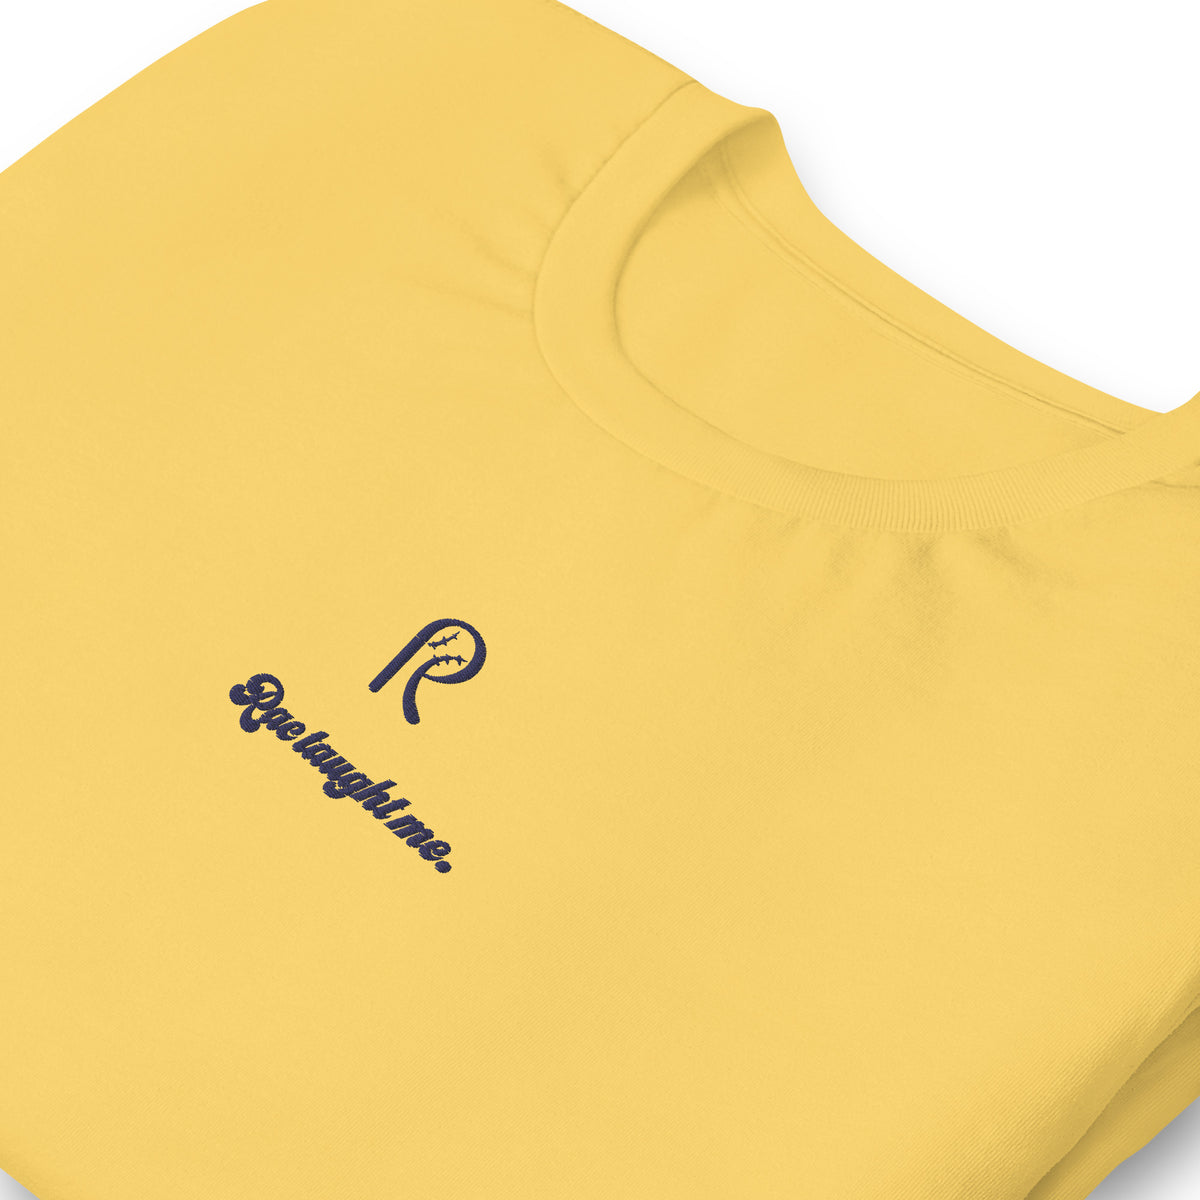 YELLOW Embroidered RAC Taught Me (Premium)